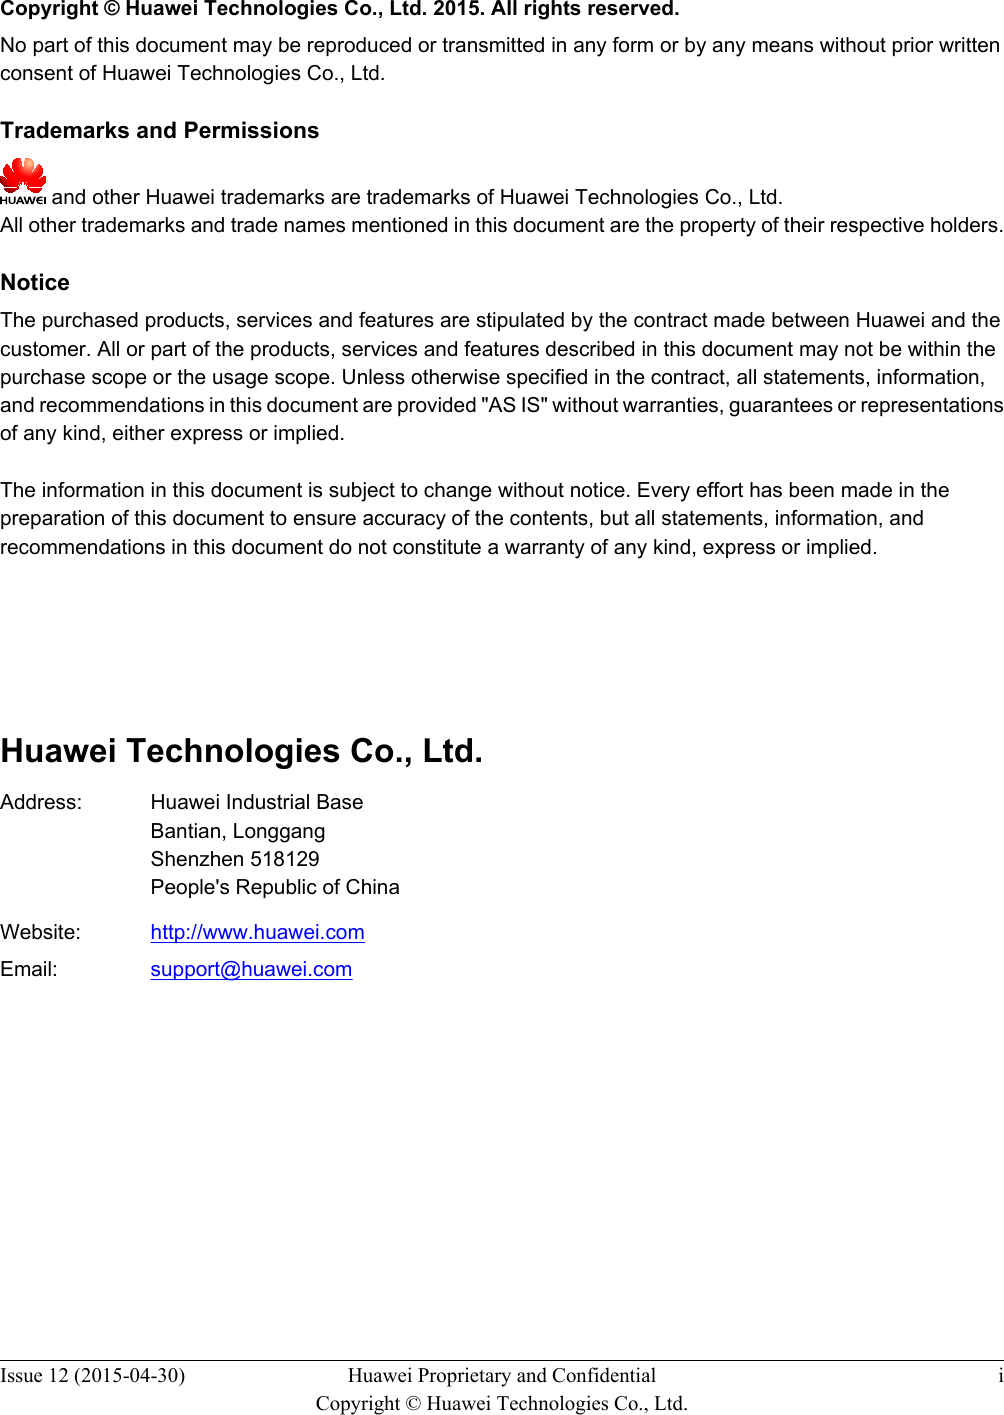   Copyright © Huawei Technologies Co., Ltd. 2015. All rights reserved.No part of this document may be reproduced or transmitted in any form or by any means without prior writtenconsent of Huawei Technologies Co., Ltd. Trademarks and Permissions and other Huawei trademarks are trademarks of Huawei Technologies Co., Ltd.All other trademarks and trade names mentioned in this document are the property of their respective holders. NoticeThe purchased products, services and features are stipulated by the contract made between Huawei and thecustomer. All or part of the products, services and features described in this document may not be within thepurchase scope or the usage scope. Unless otherwise specified in the contract, all statements, information,and recommendations in this document are provided &quot;AS IS&quot; without warranties, guarantees or representationsof any kind, either express or implied.The information in this document is subject to change without notice. Every effort has been made in thepreparation of this document to ensure accuracy of the contents, but all statements, information, andrecommendations in this document do not constitute a warranty of any kind, express or implied.       Huawei Technologies Co., Ltd.Address: Huawei Industrial BaseBantian, LonggangShenzhen 518129People&apos;s Republic of ChinaWebsite: http://www.huawei.comEmail: support@huawei.comIssue 12 (2015-04-30) Huawei Proprietary and ConfidentialCopyright © Huawei Technologies Co., Ltd.i